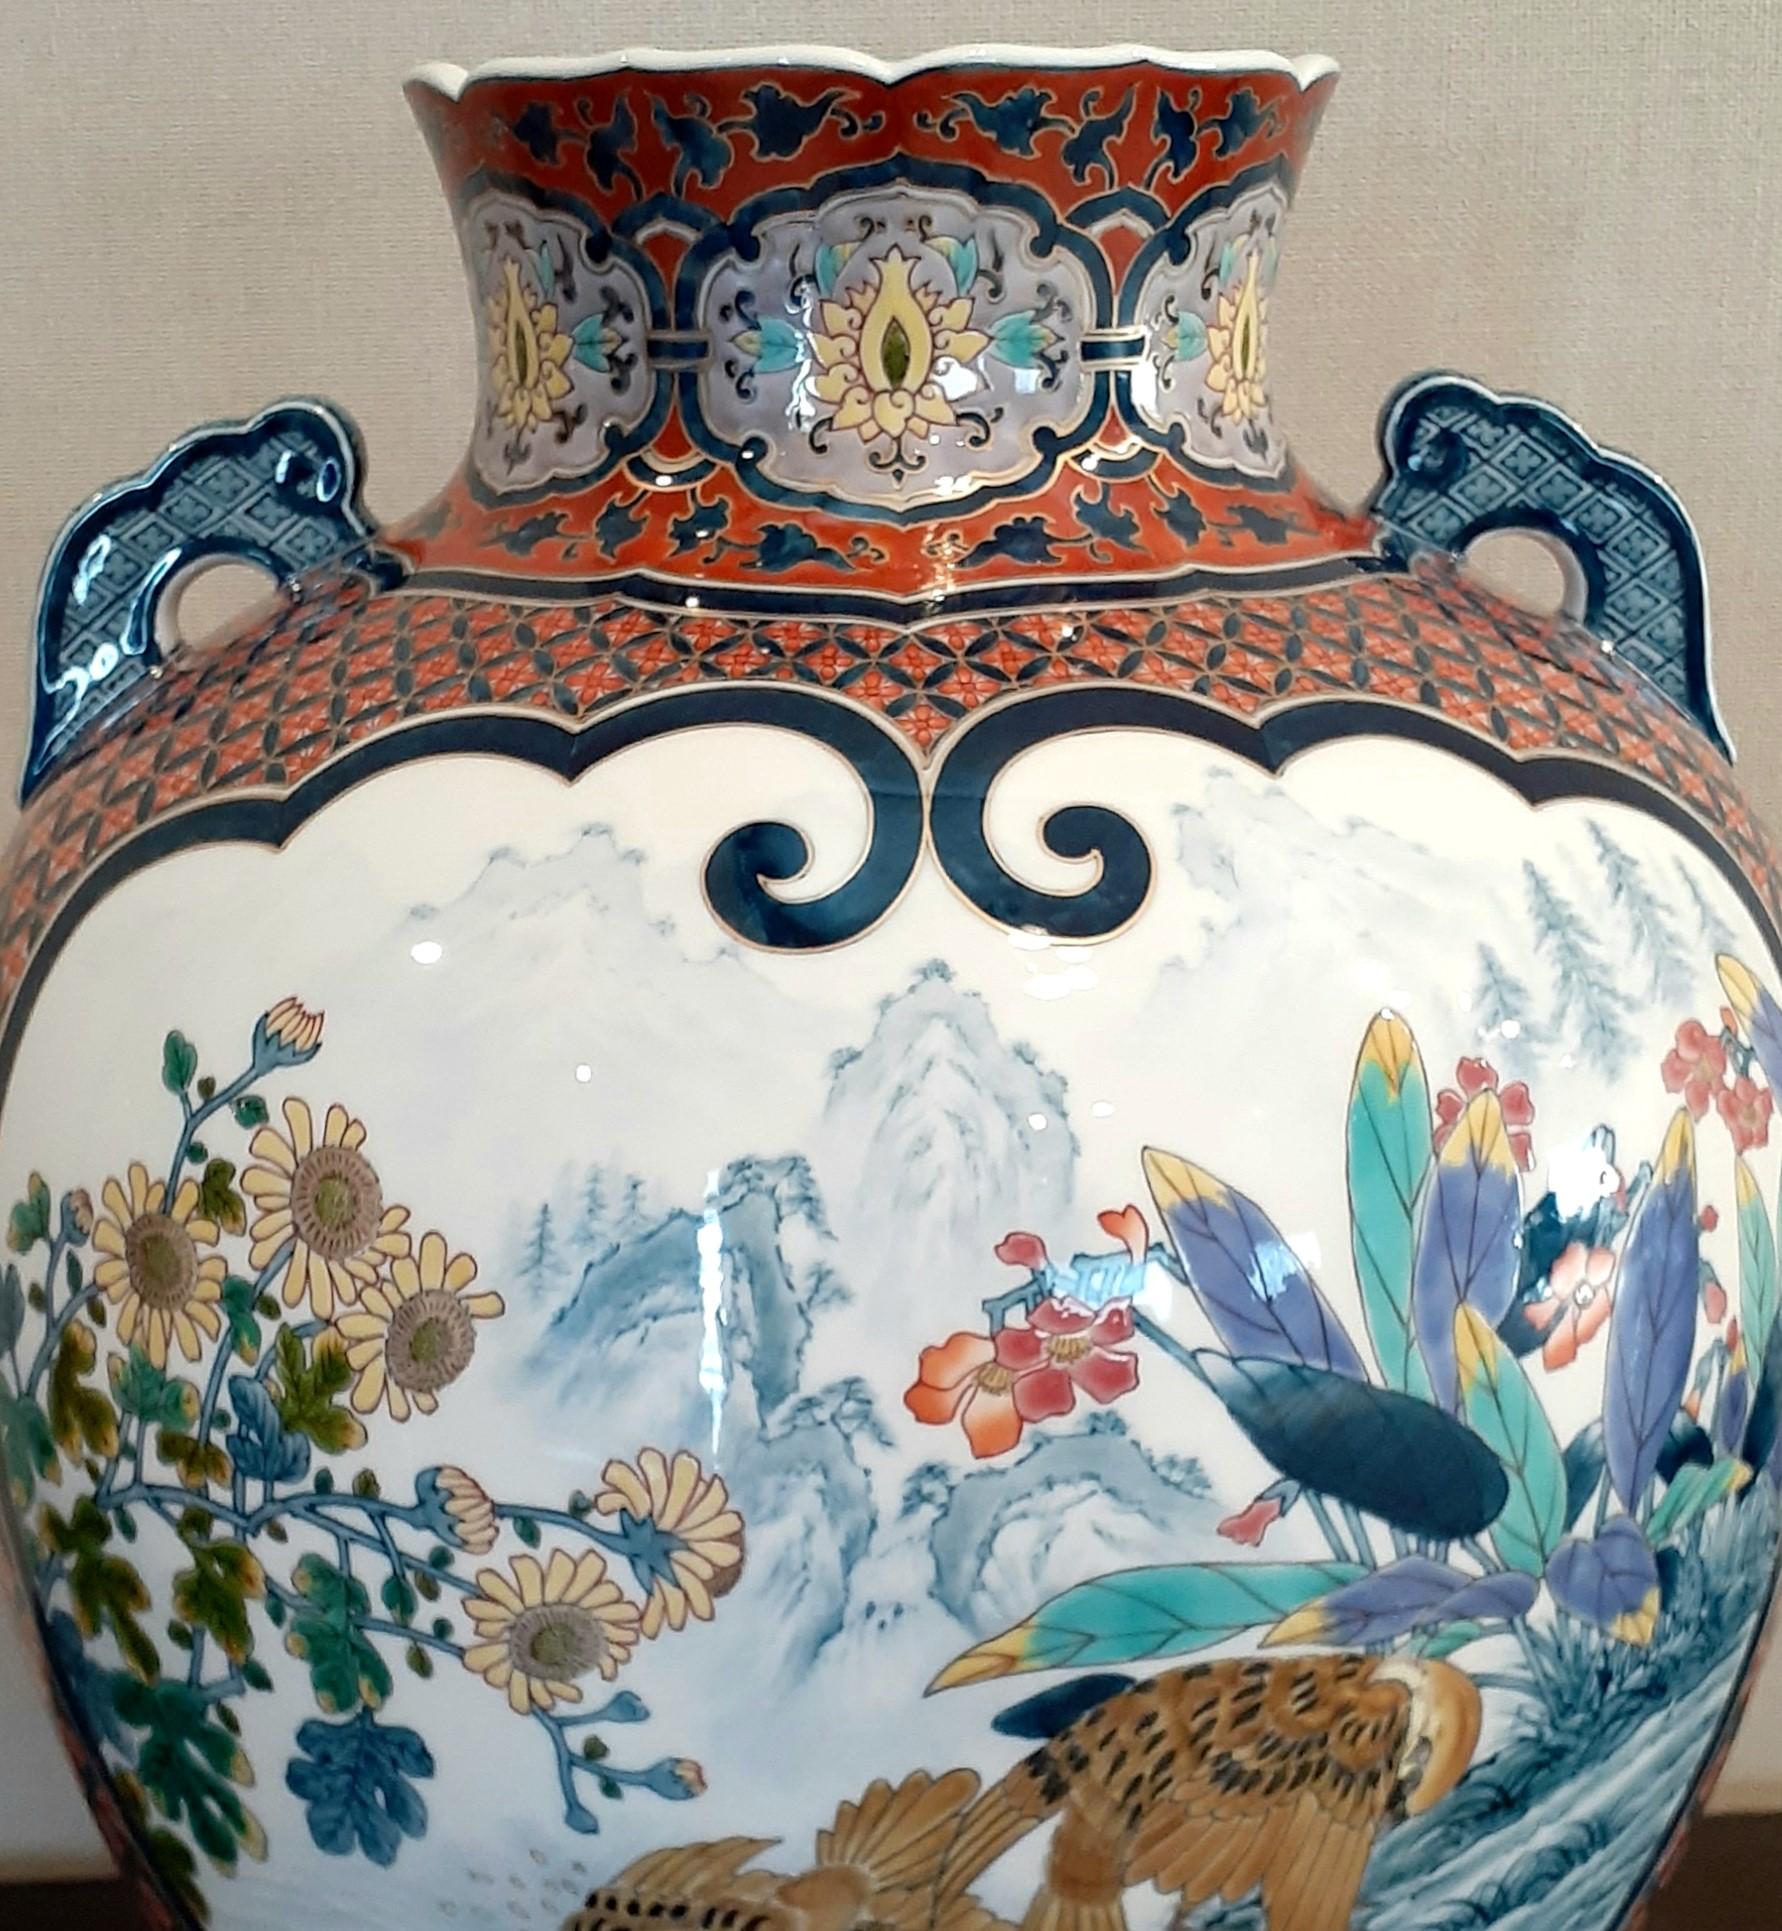 Hand-Painted Japanese Contemporary Red Blue Ko-Imari Porcelain Vase by Master Artist